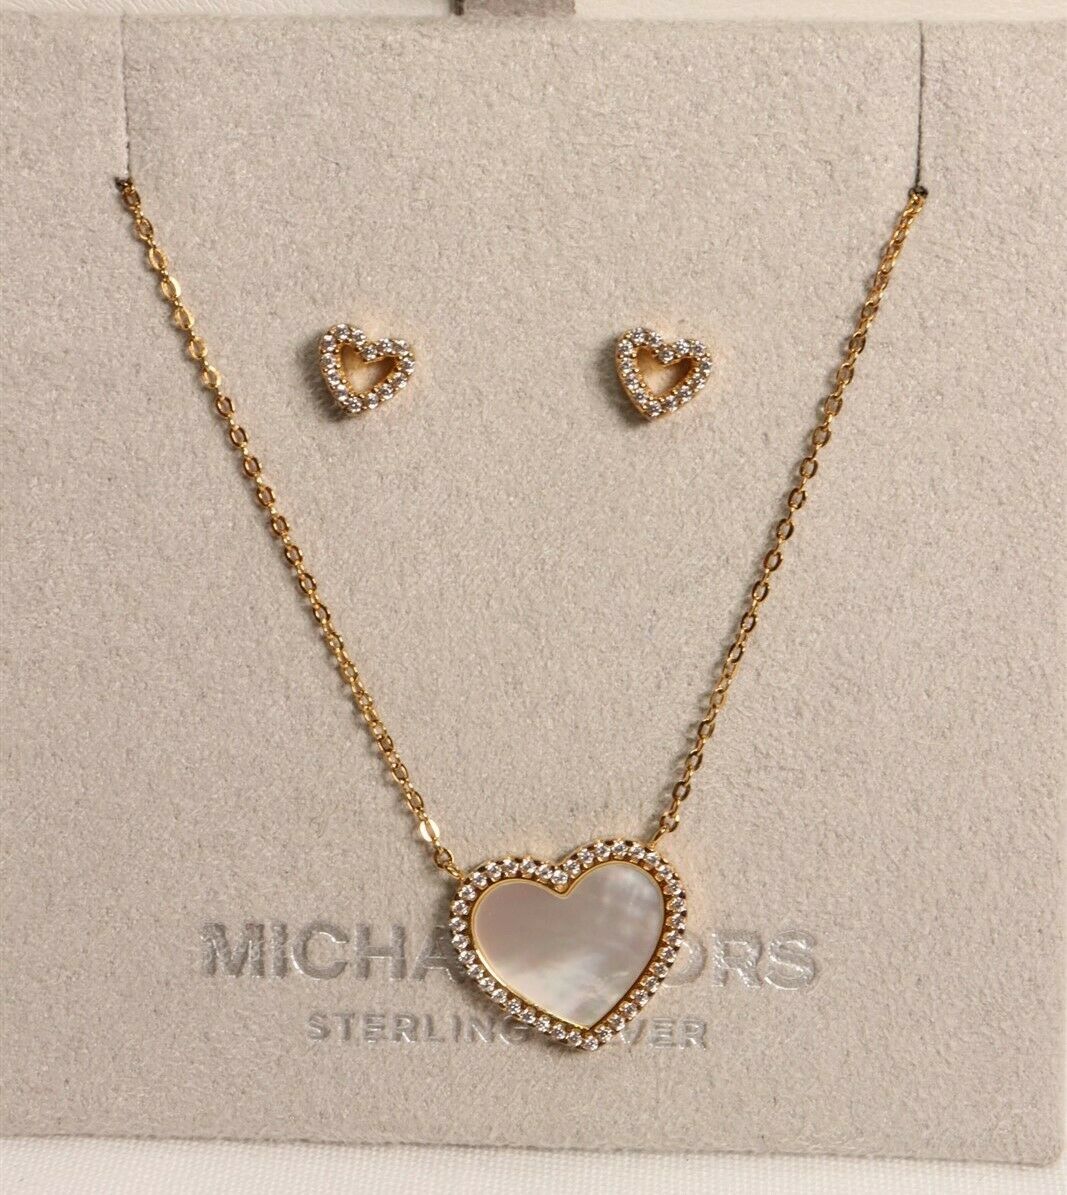 Michael Kors Gold Tone over .925 Sterling MOP CZ Heart Necklac Earrings $195 New